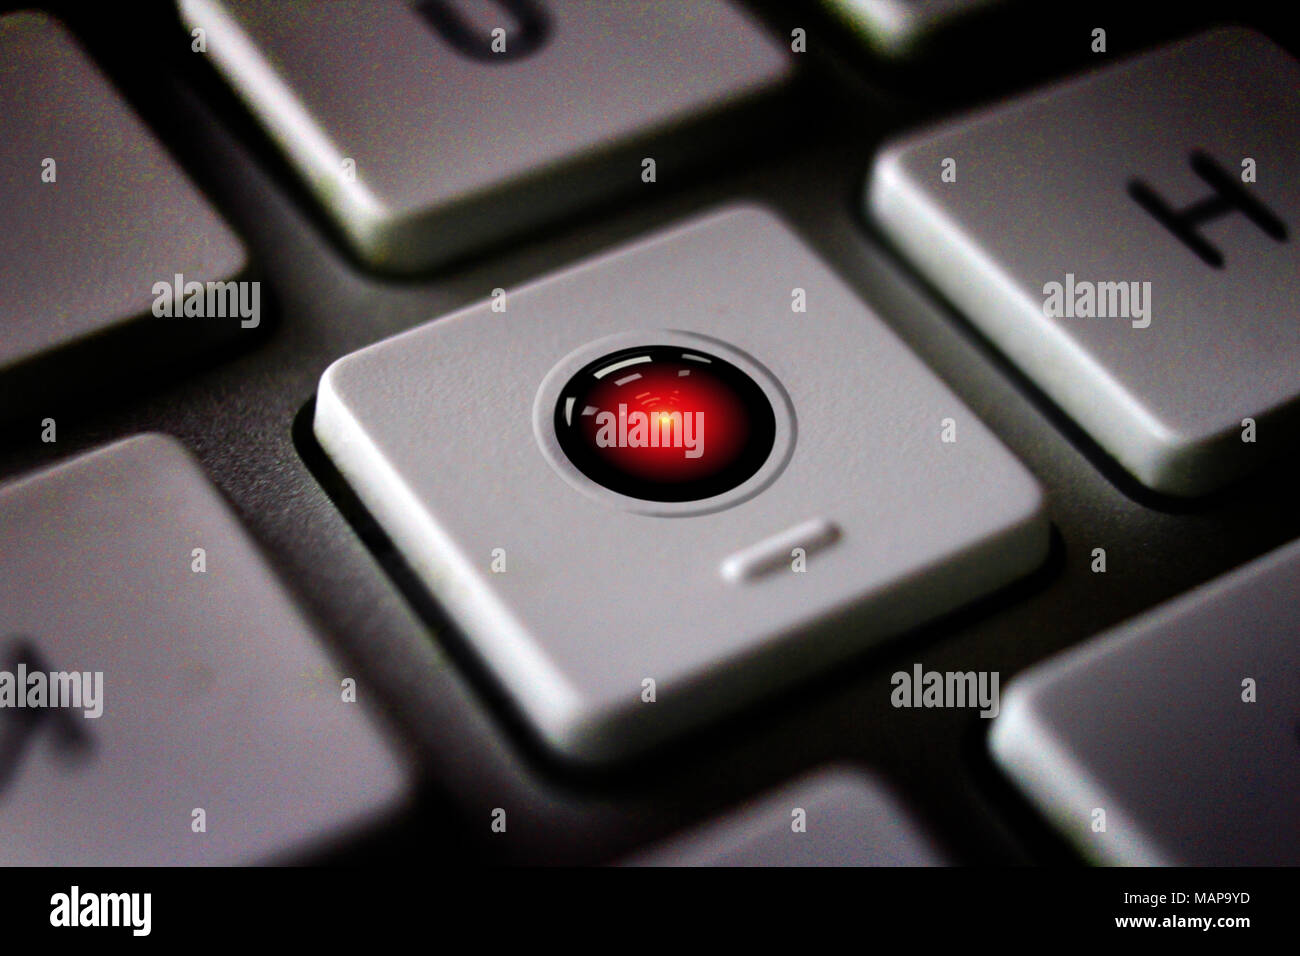 Image of HAL computer from Stanley Kubrick's 2001:A Space Odyssey (film) icon on computer keyboard Stock Photo